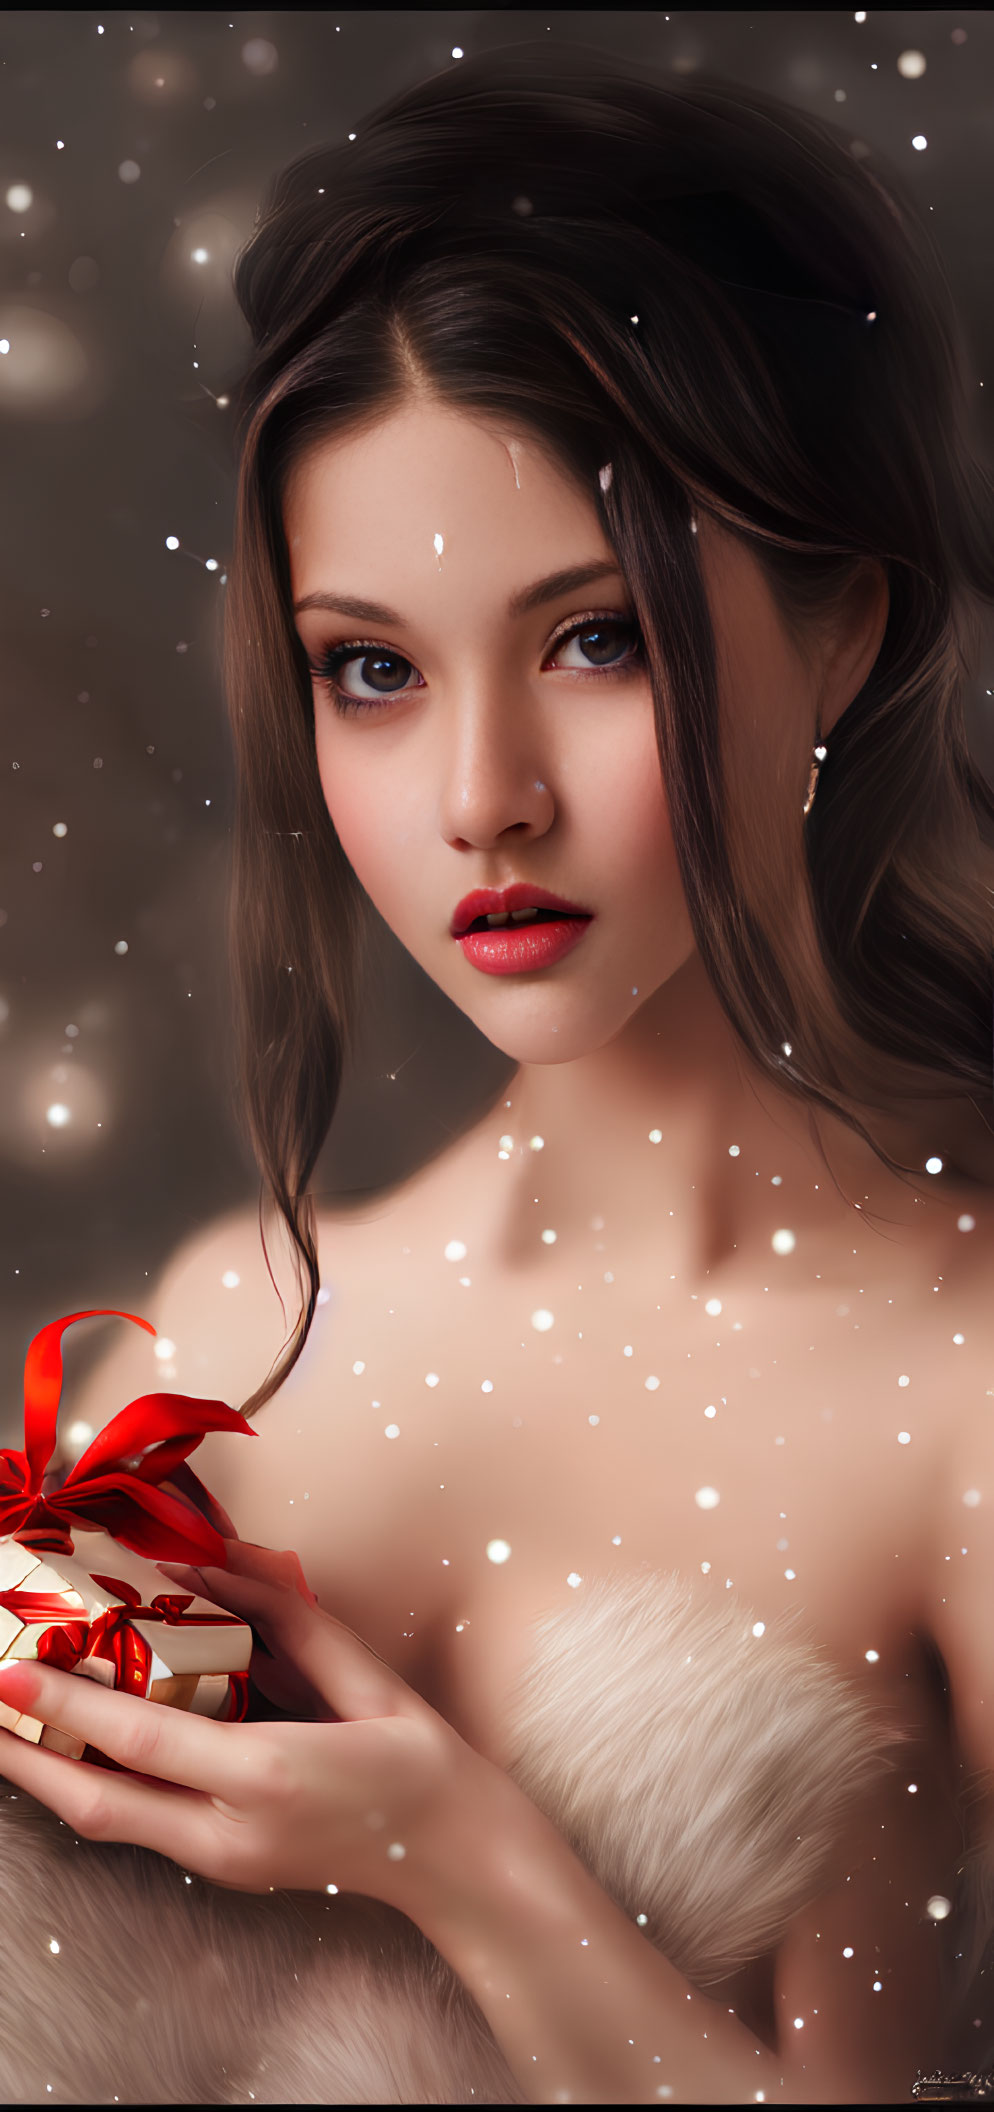 Digital illustration: Woman with long brown hair holding gift in snowy scene